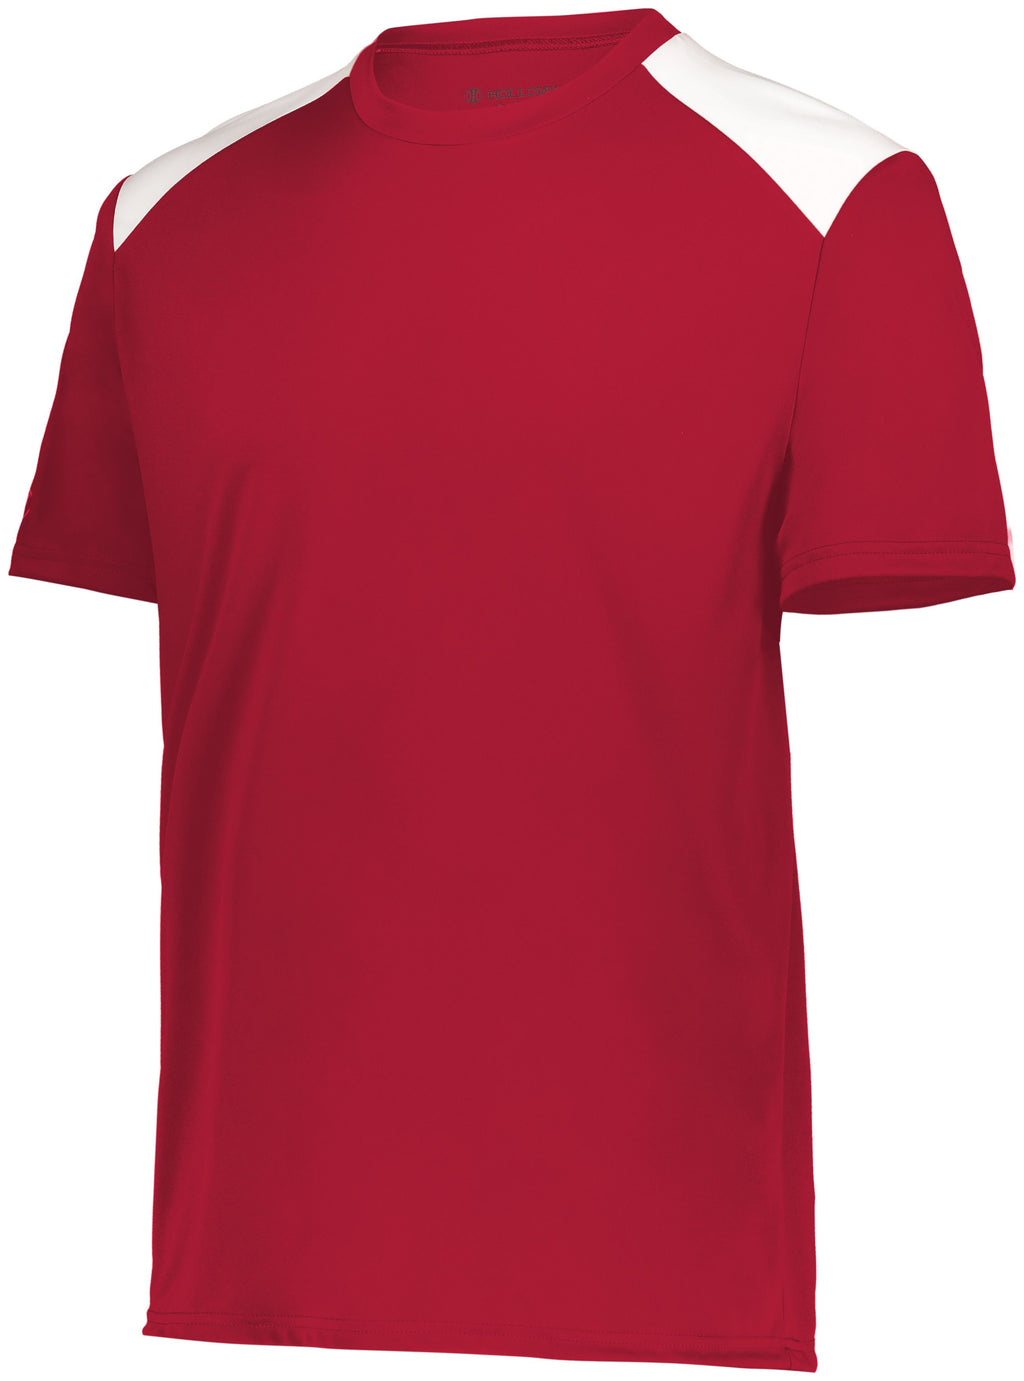 MMS Red Soccer Jersey - REQUIRED for players**